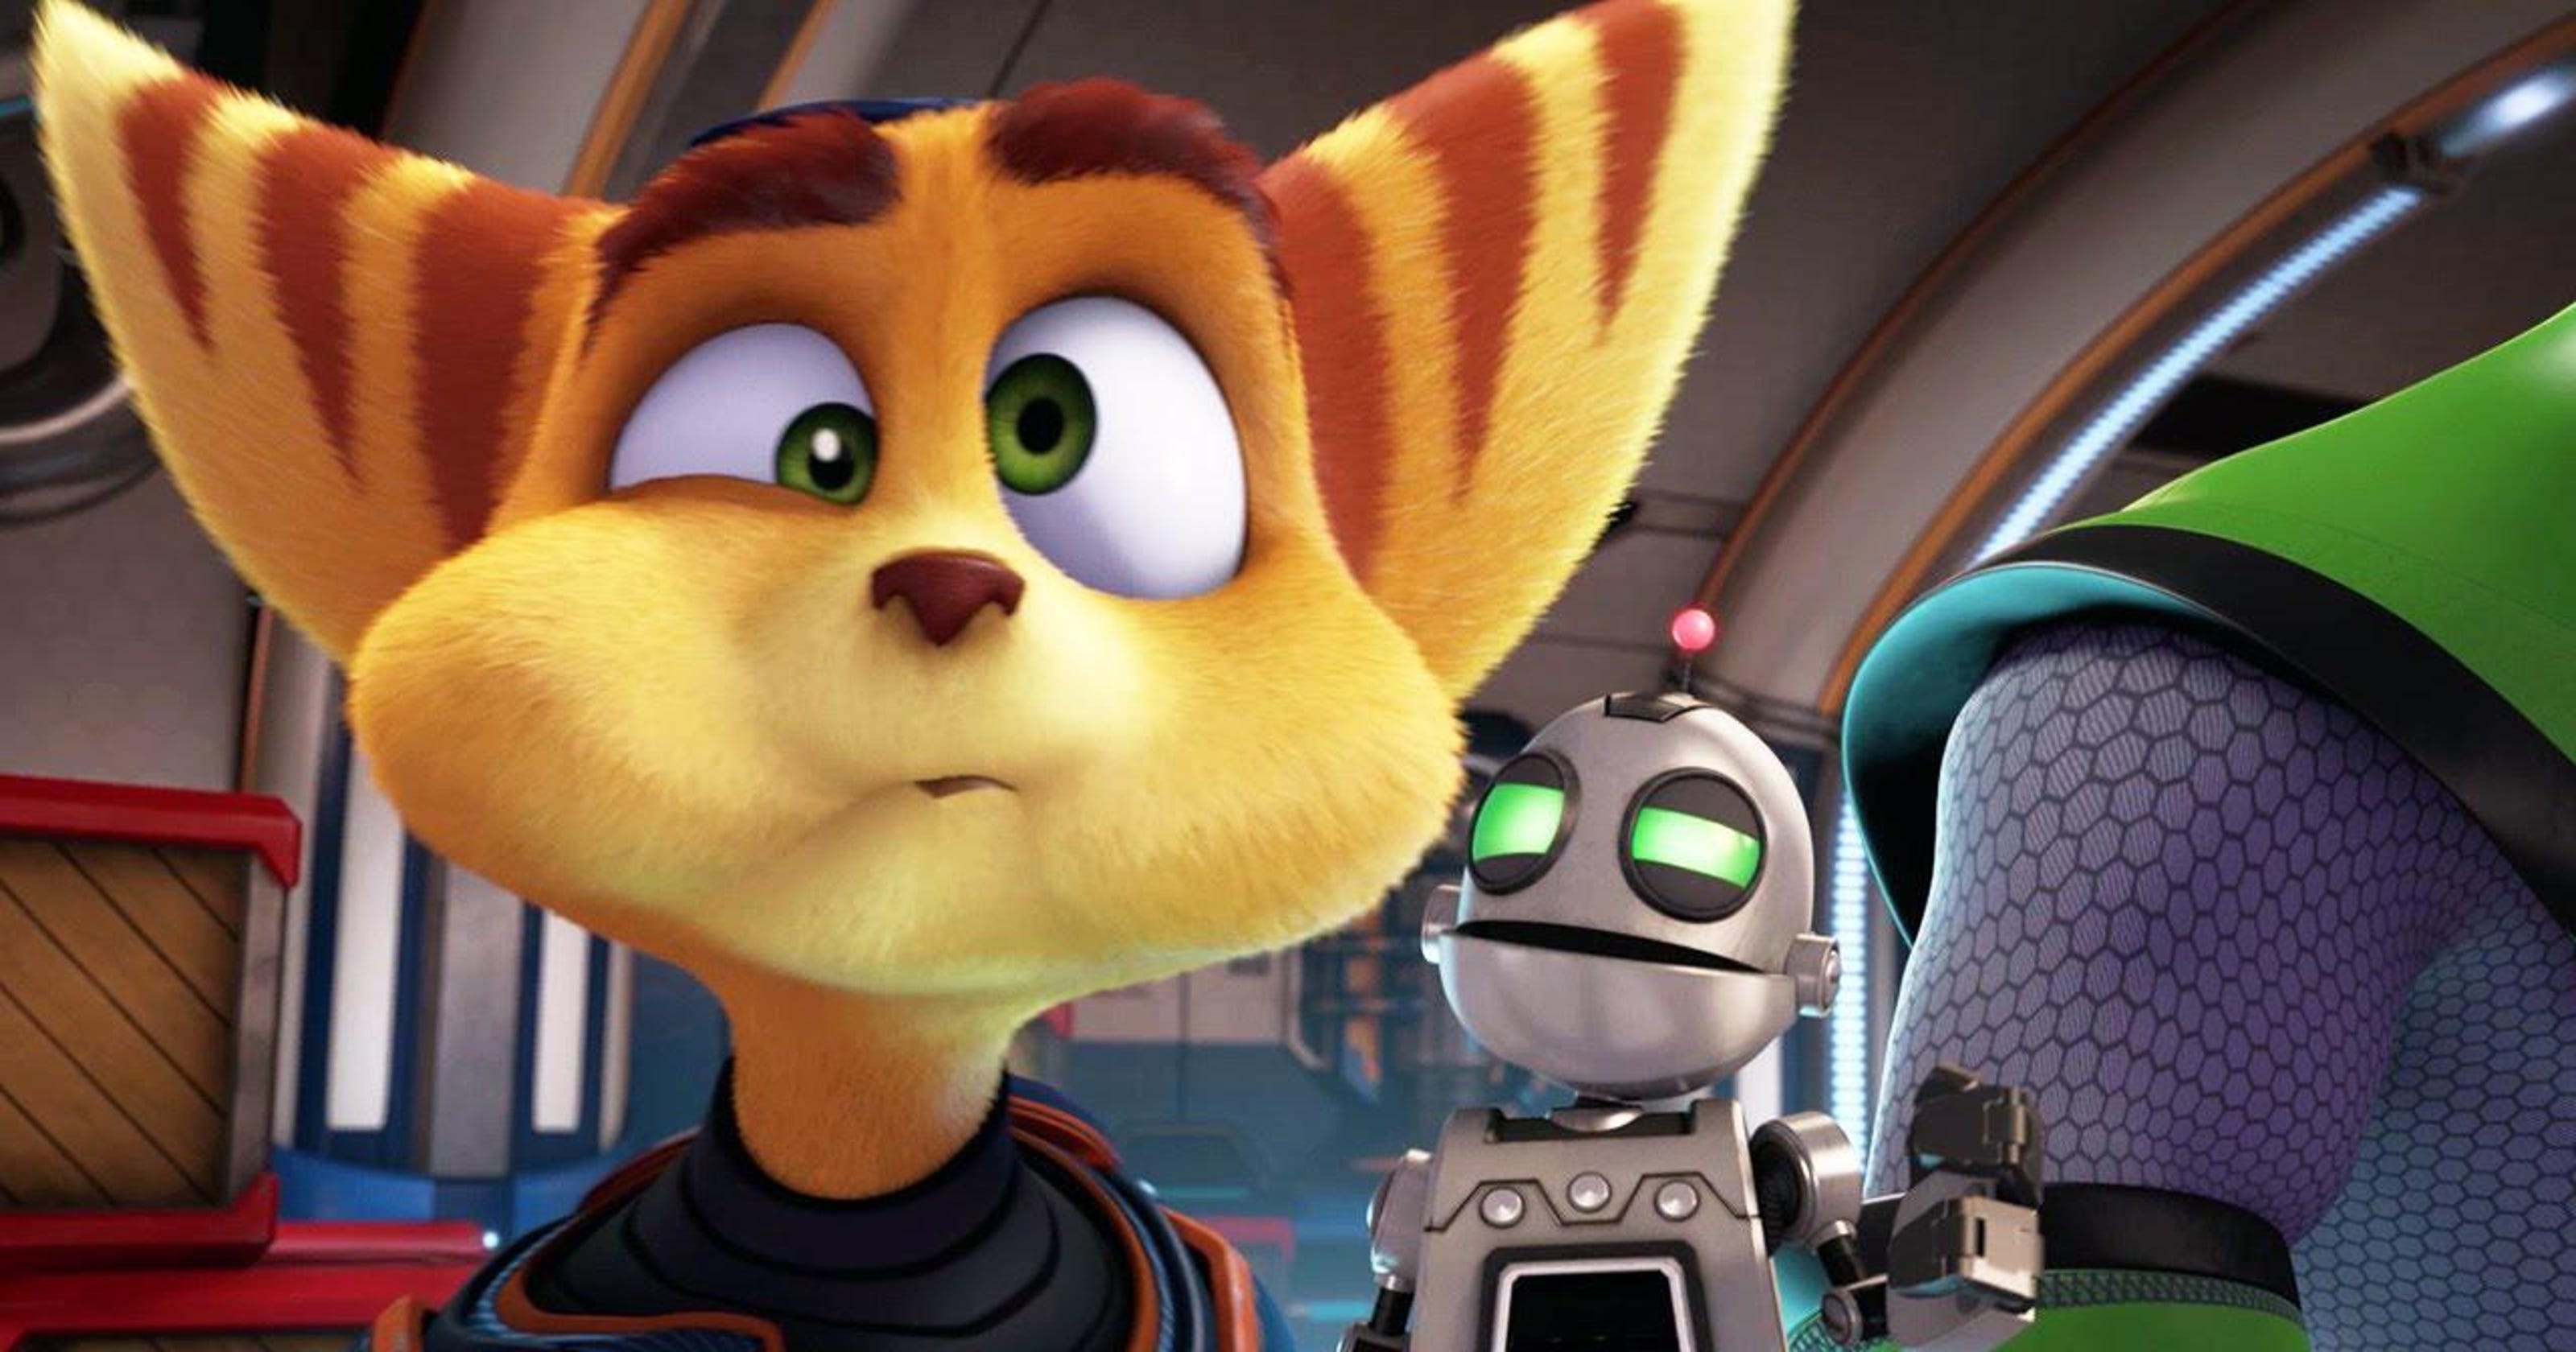 Review: Video game series reborn in ‘Ratchet and Clank’